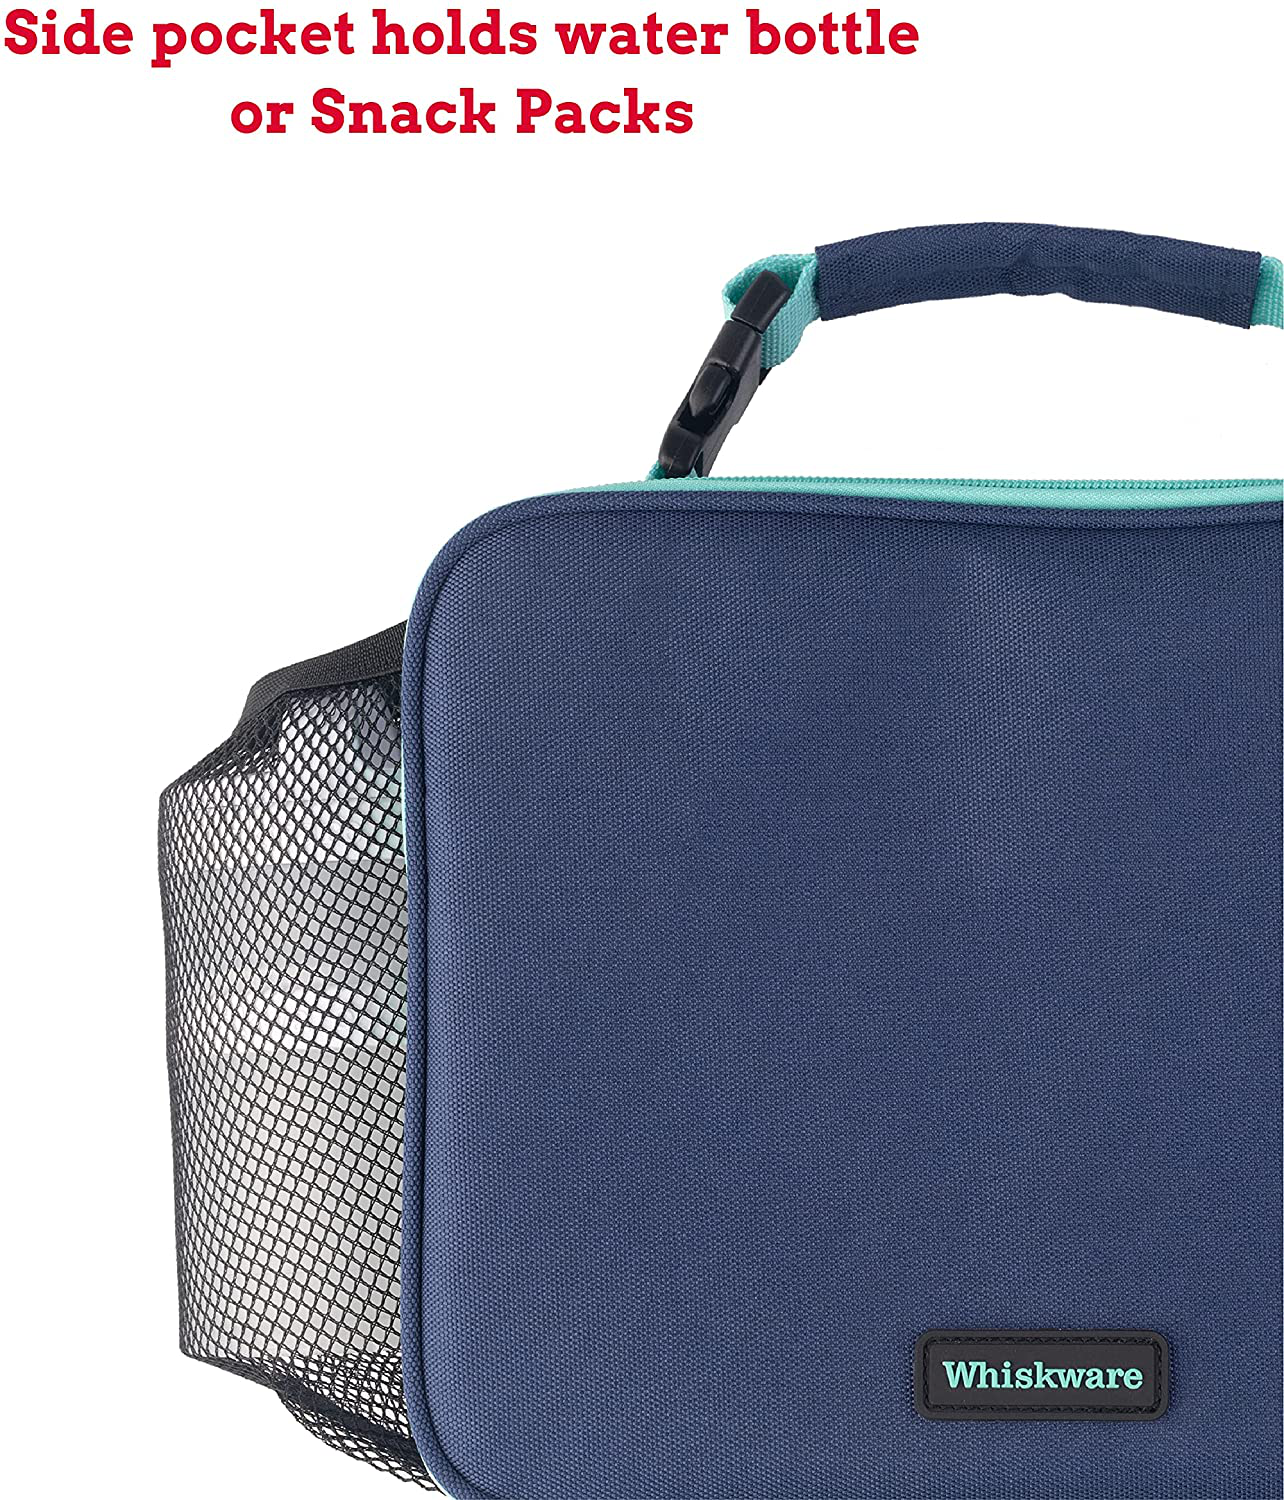 Whiskware Insulated Soft Cooler Lunch Box for School, Work, and Travel, One Size, Coral